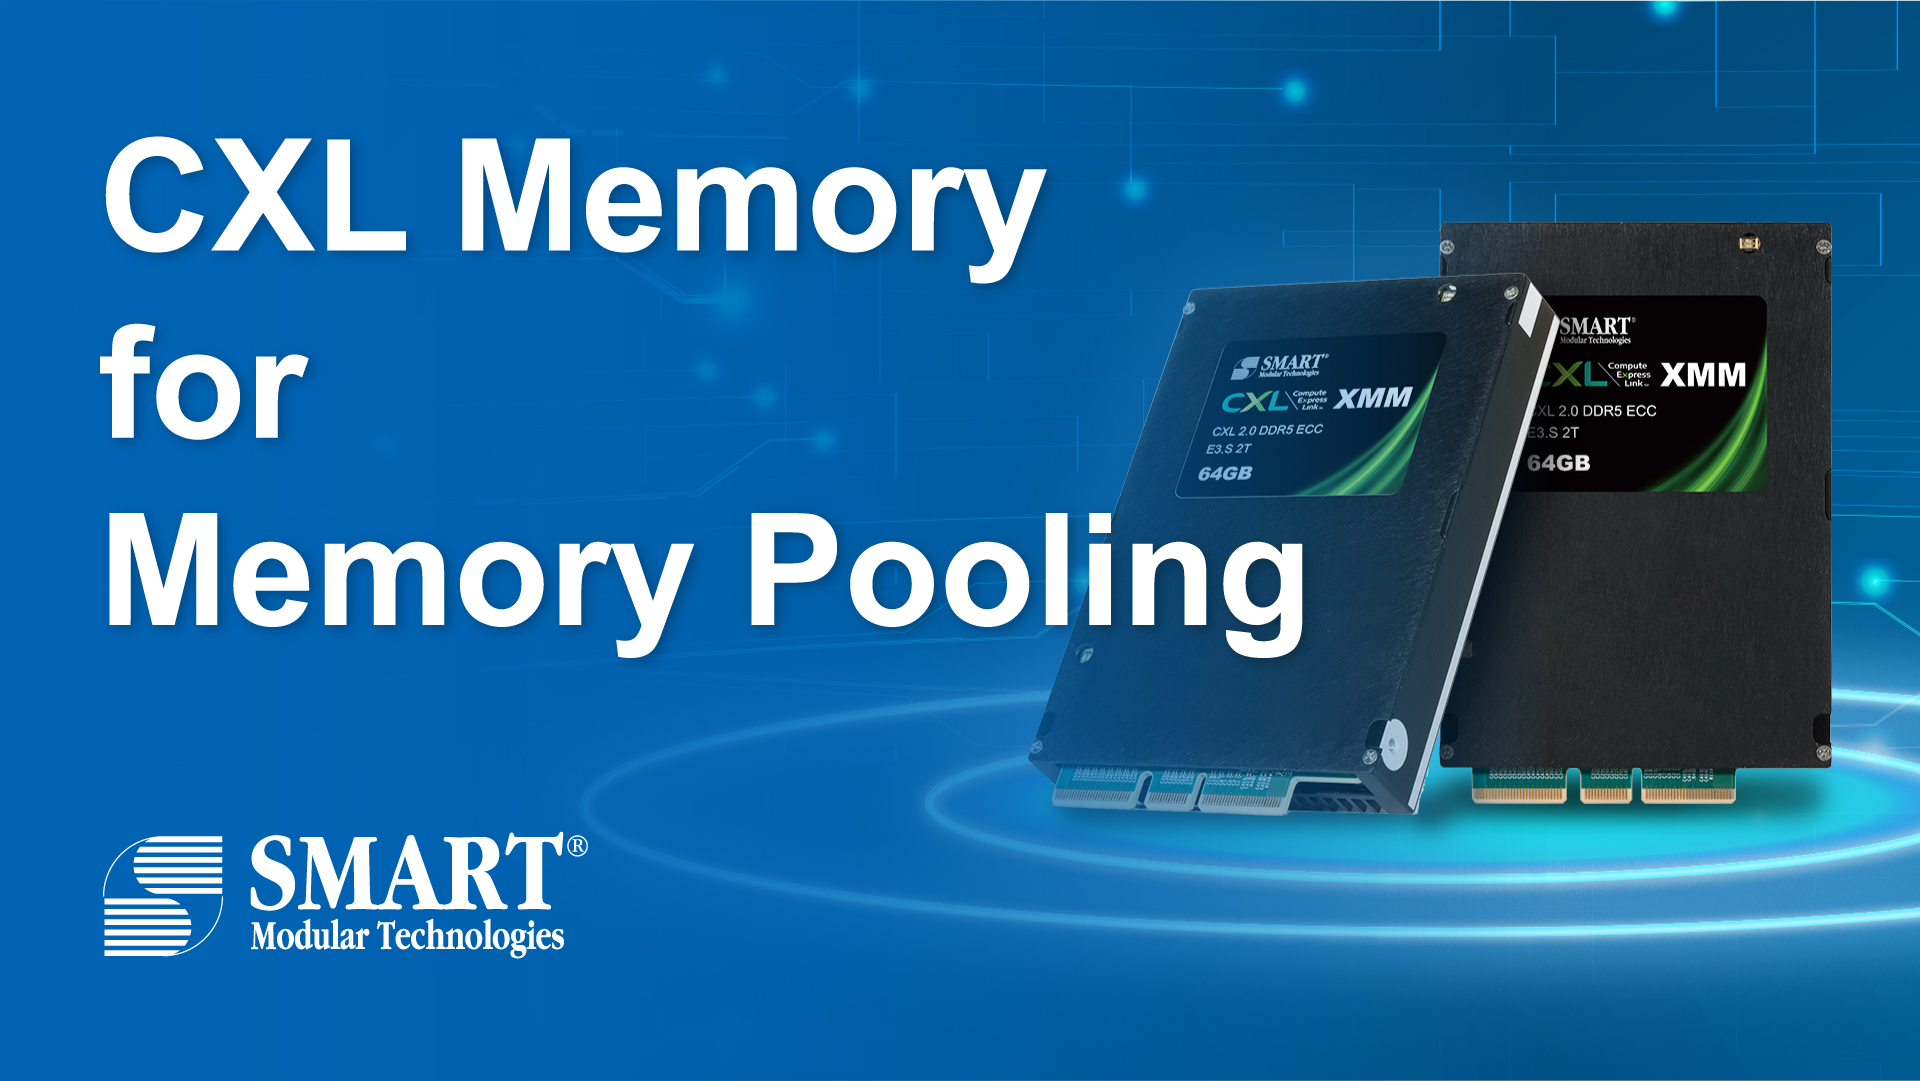 Enable Memory Pooling for Revolutionized Performance with CXL Memory Solutions 